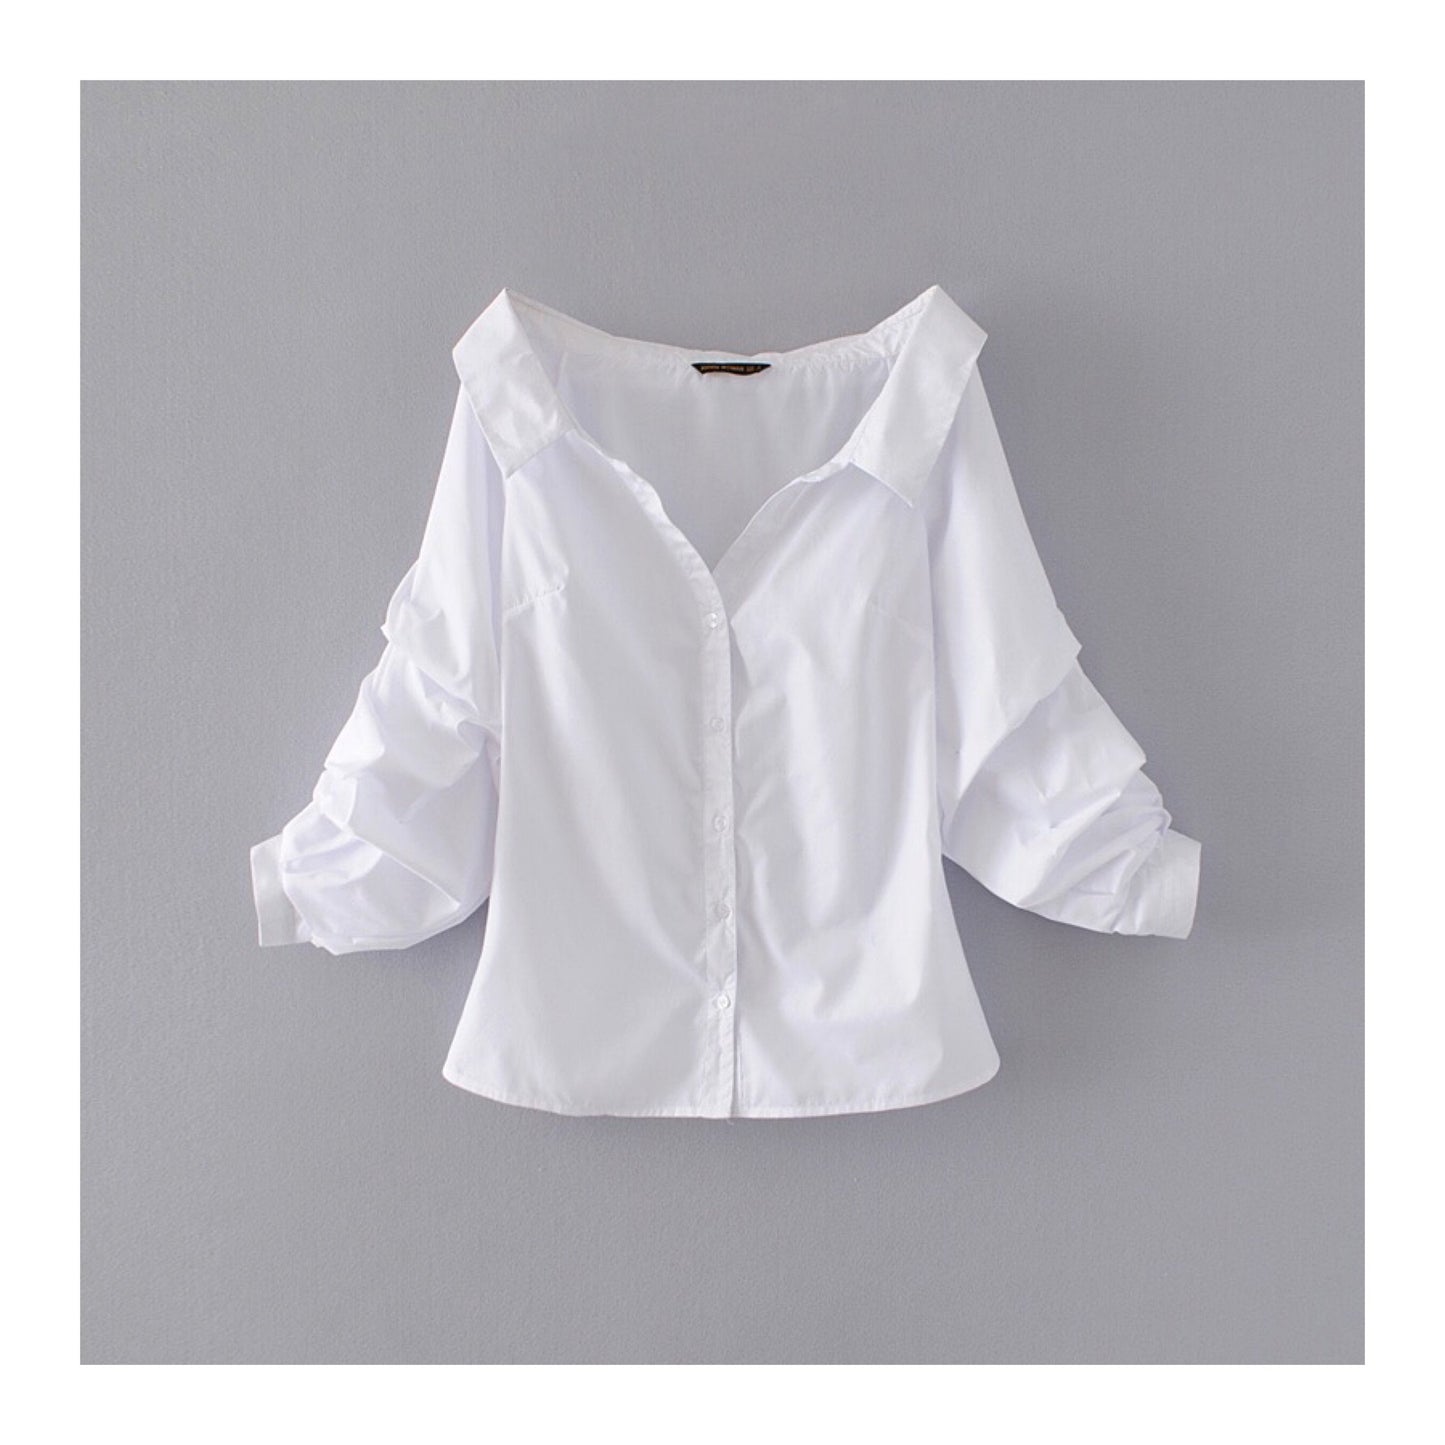 Mia White Shirt - Made For Her Label